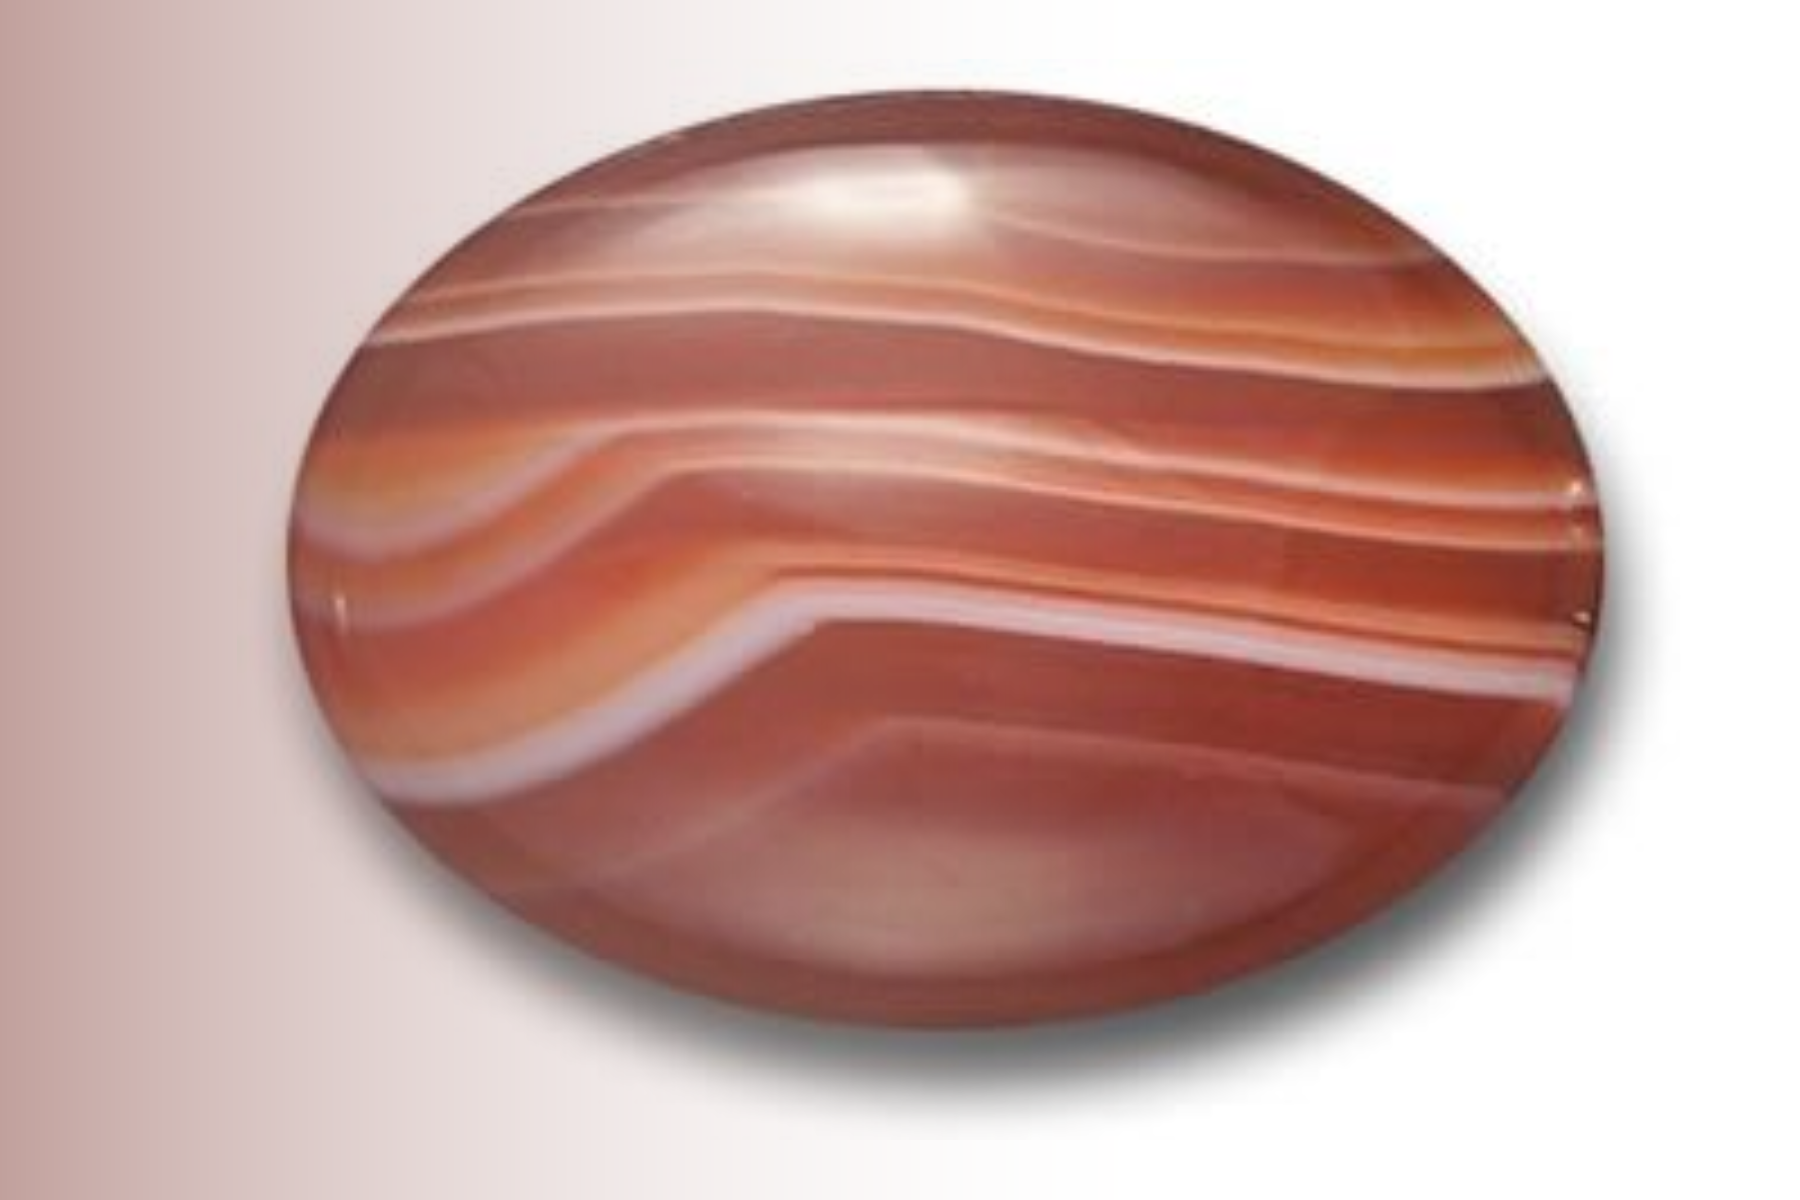 Sardonyx stone oblong with white and golden layers